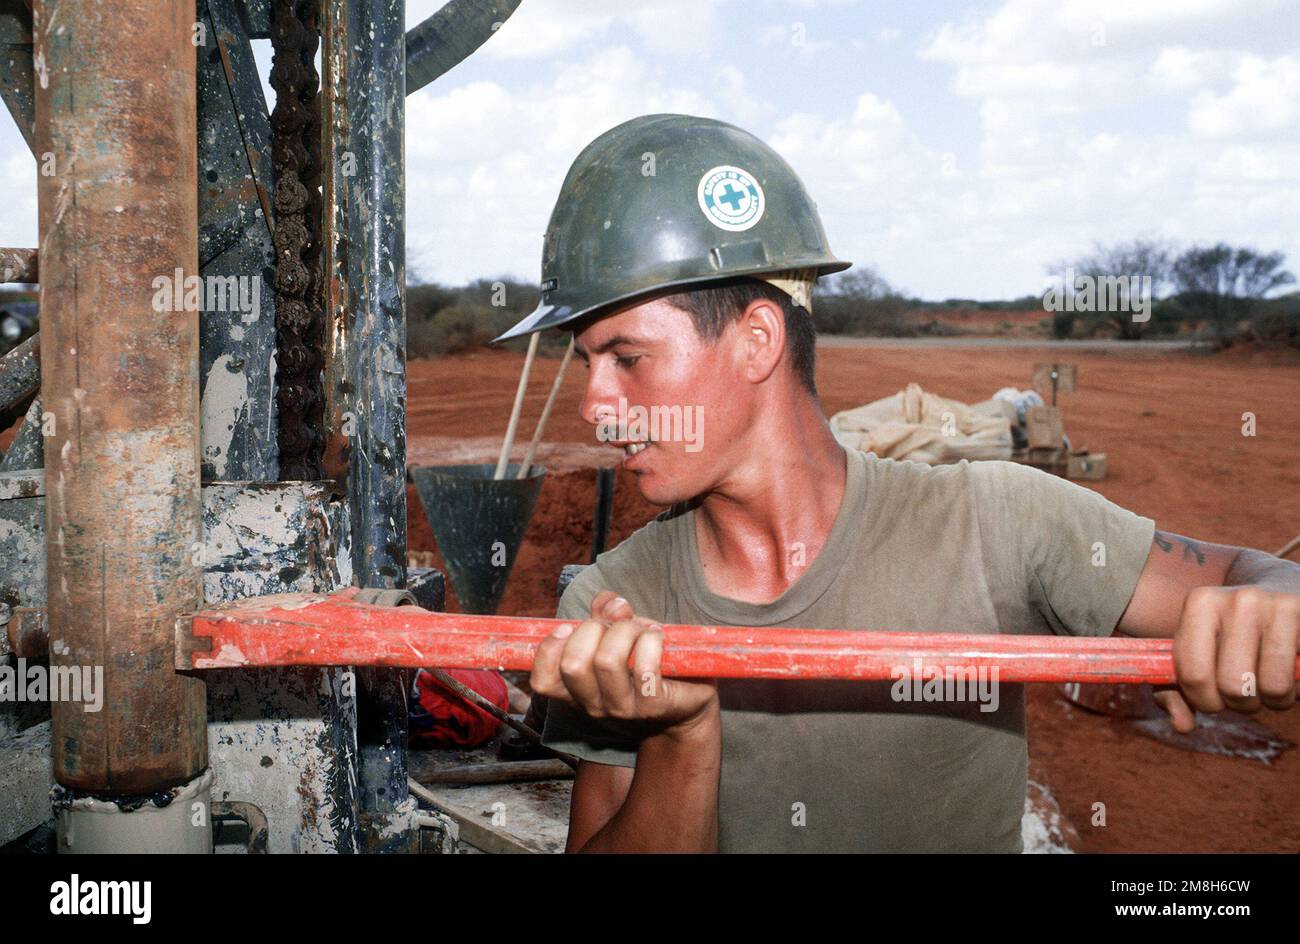 A member of Naval Mobile Construction Battalion 1 (NMCB-1) tightens a fitting on a well drilling rig during the multinational relief effort Operation Restore Hope. The water well, near Bale Dogle, is intended to supply an old Soviet air base being used by U.S. and Moroccan personnel participating in the operation. Subject Operation/Series: RESTORE HOPE Country: Somalia (SOM) Stock Photo